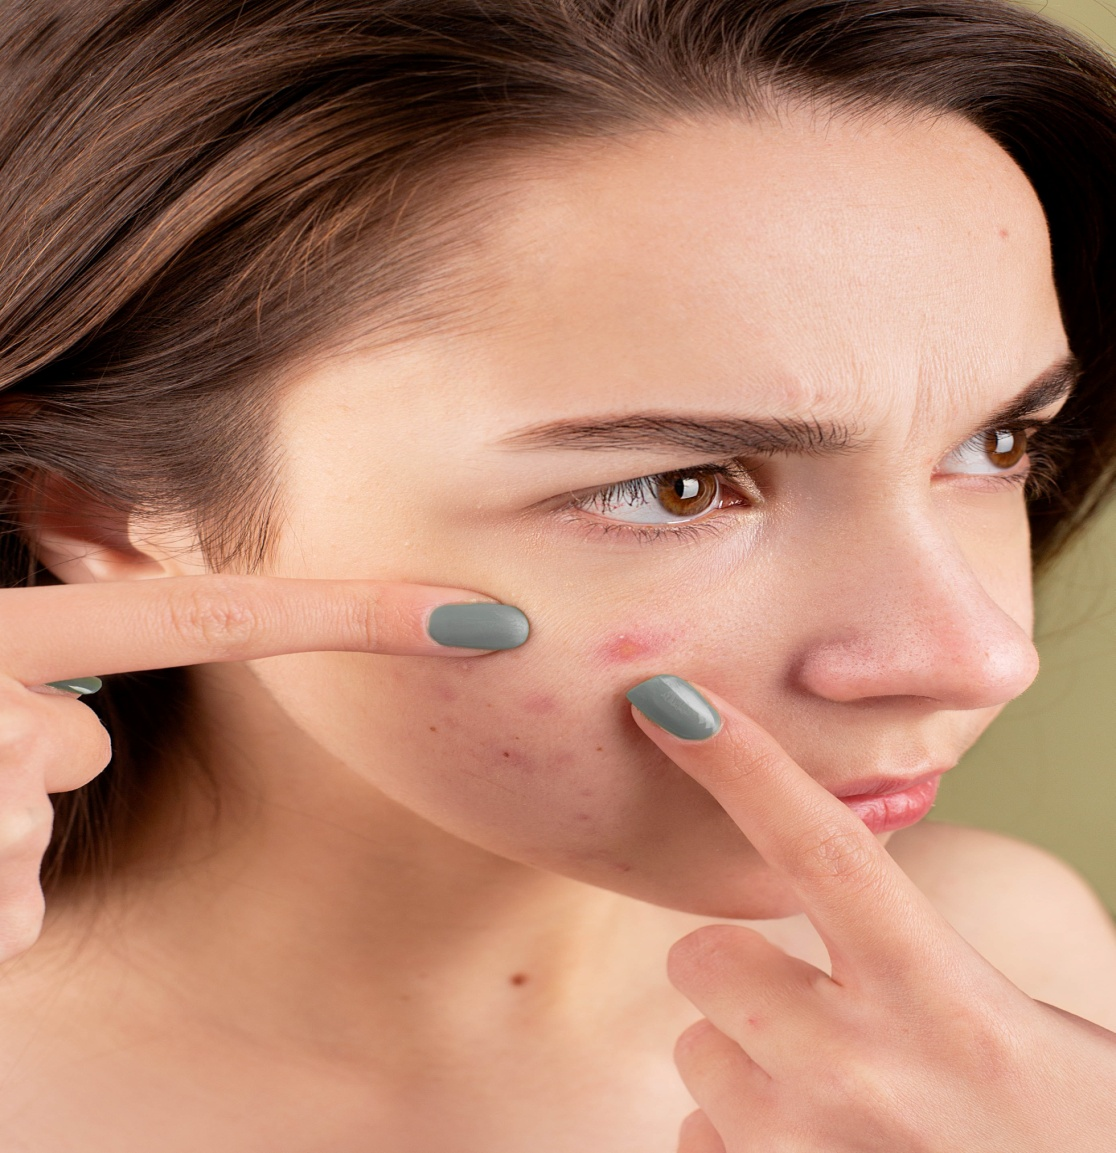 A woman squeezing her acne with her fingers.